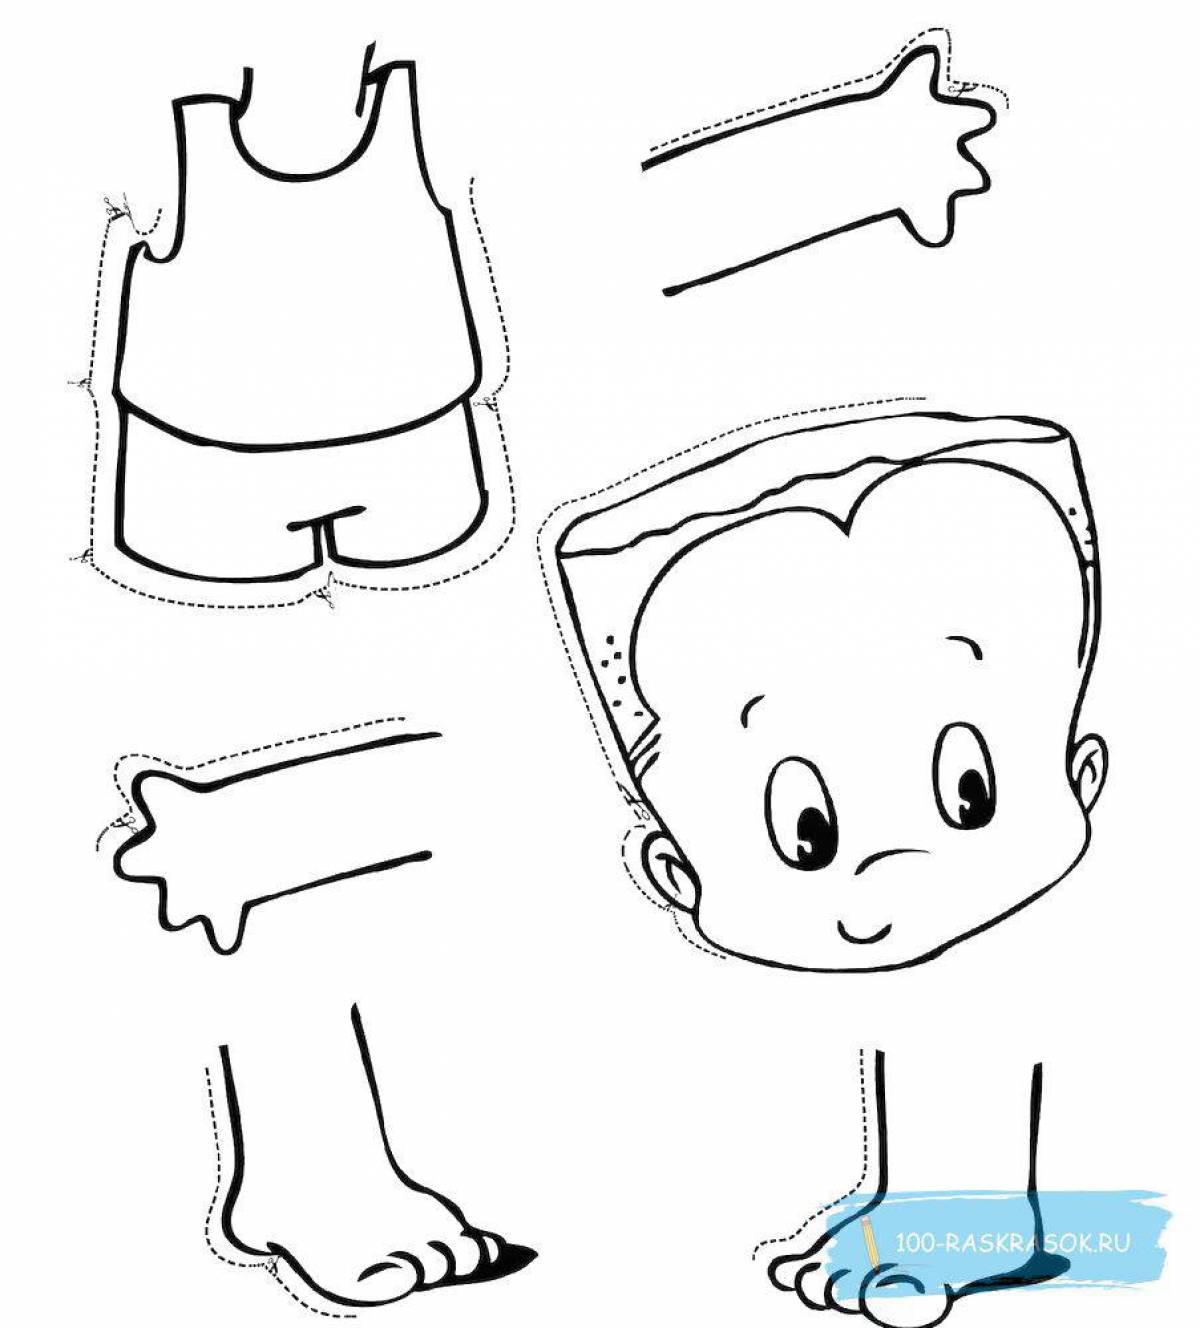 Human body for kids #2